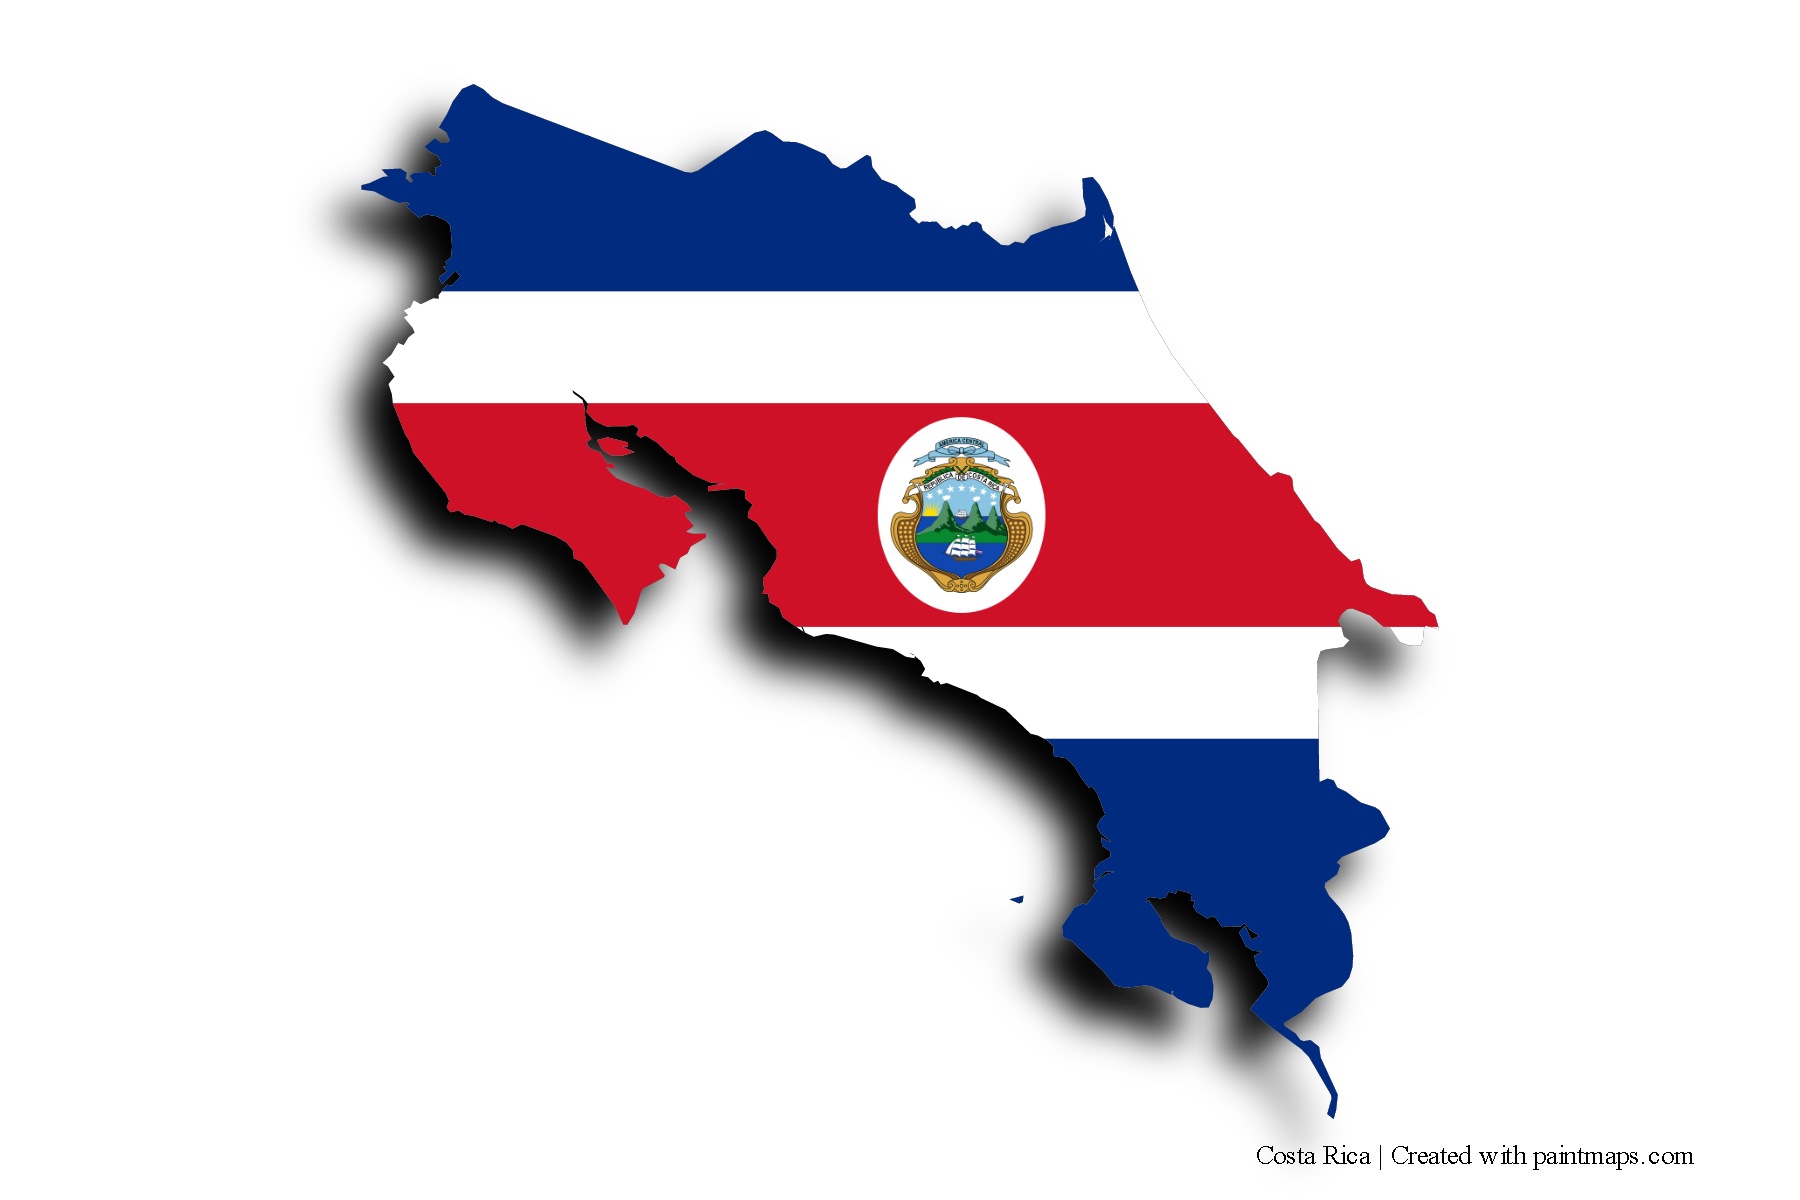 Sample Photo Maps for Costa Rica